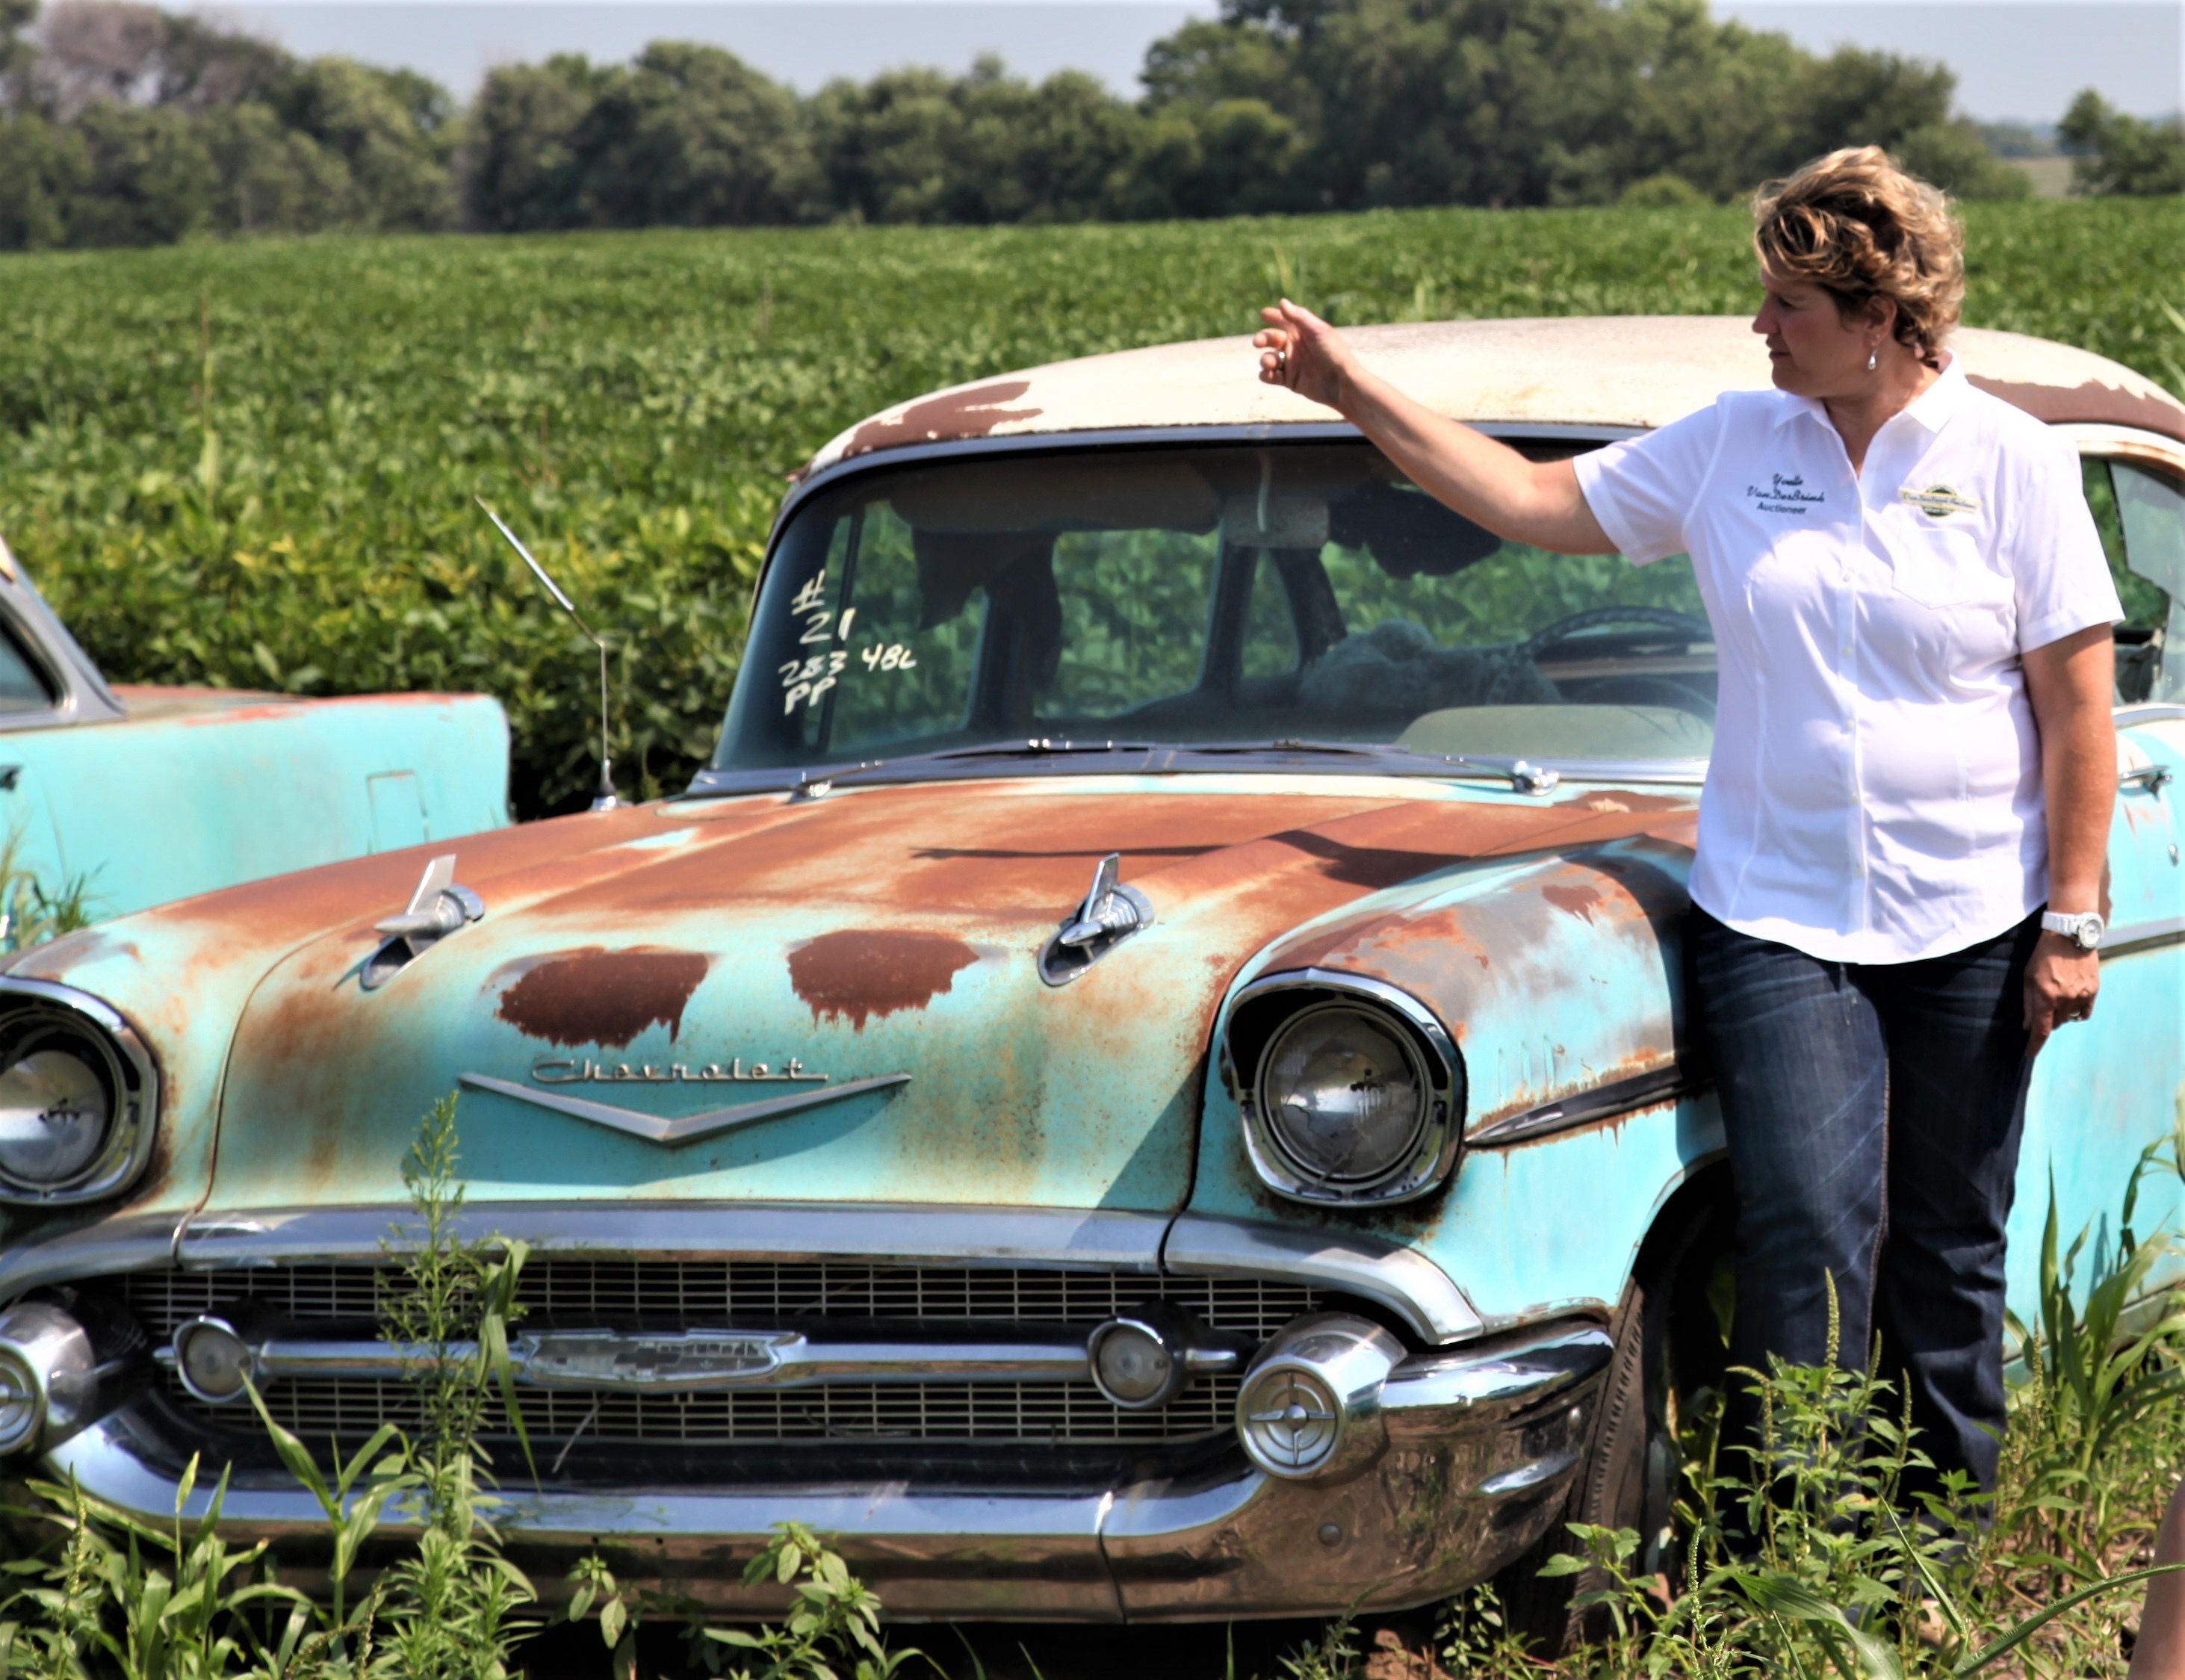 Woman standing next to classic car with rust